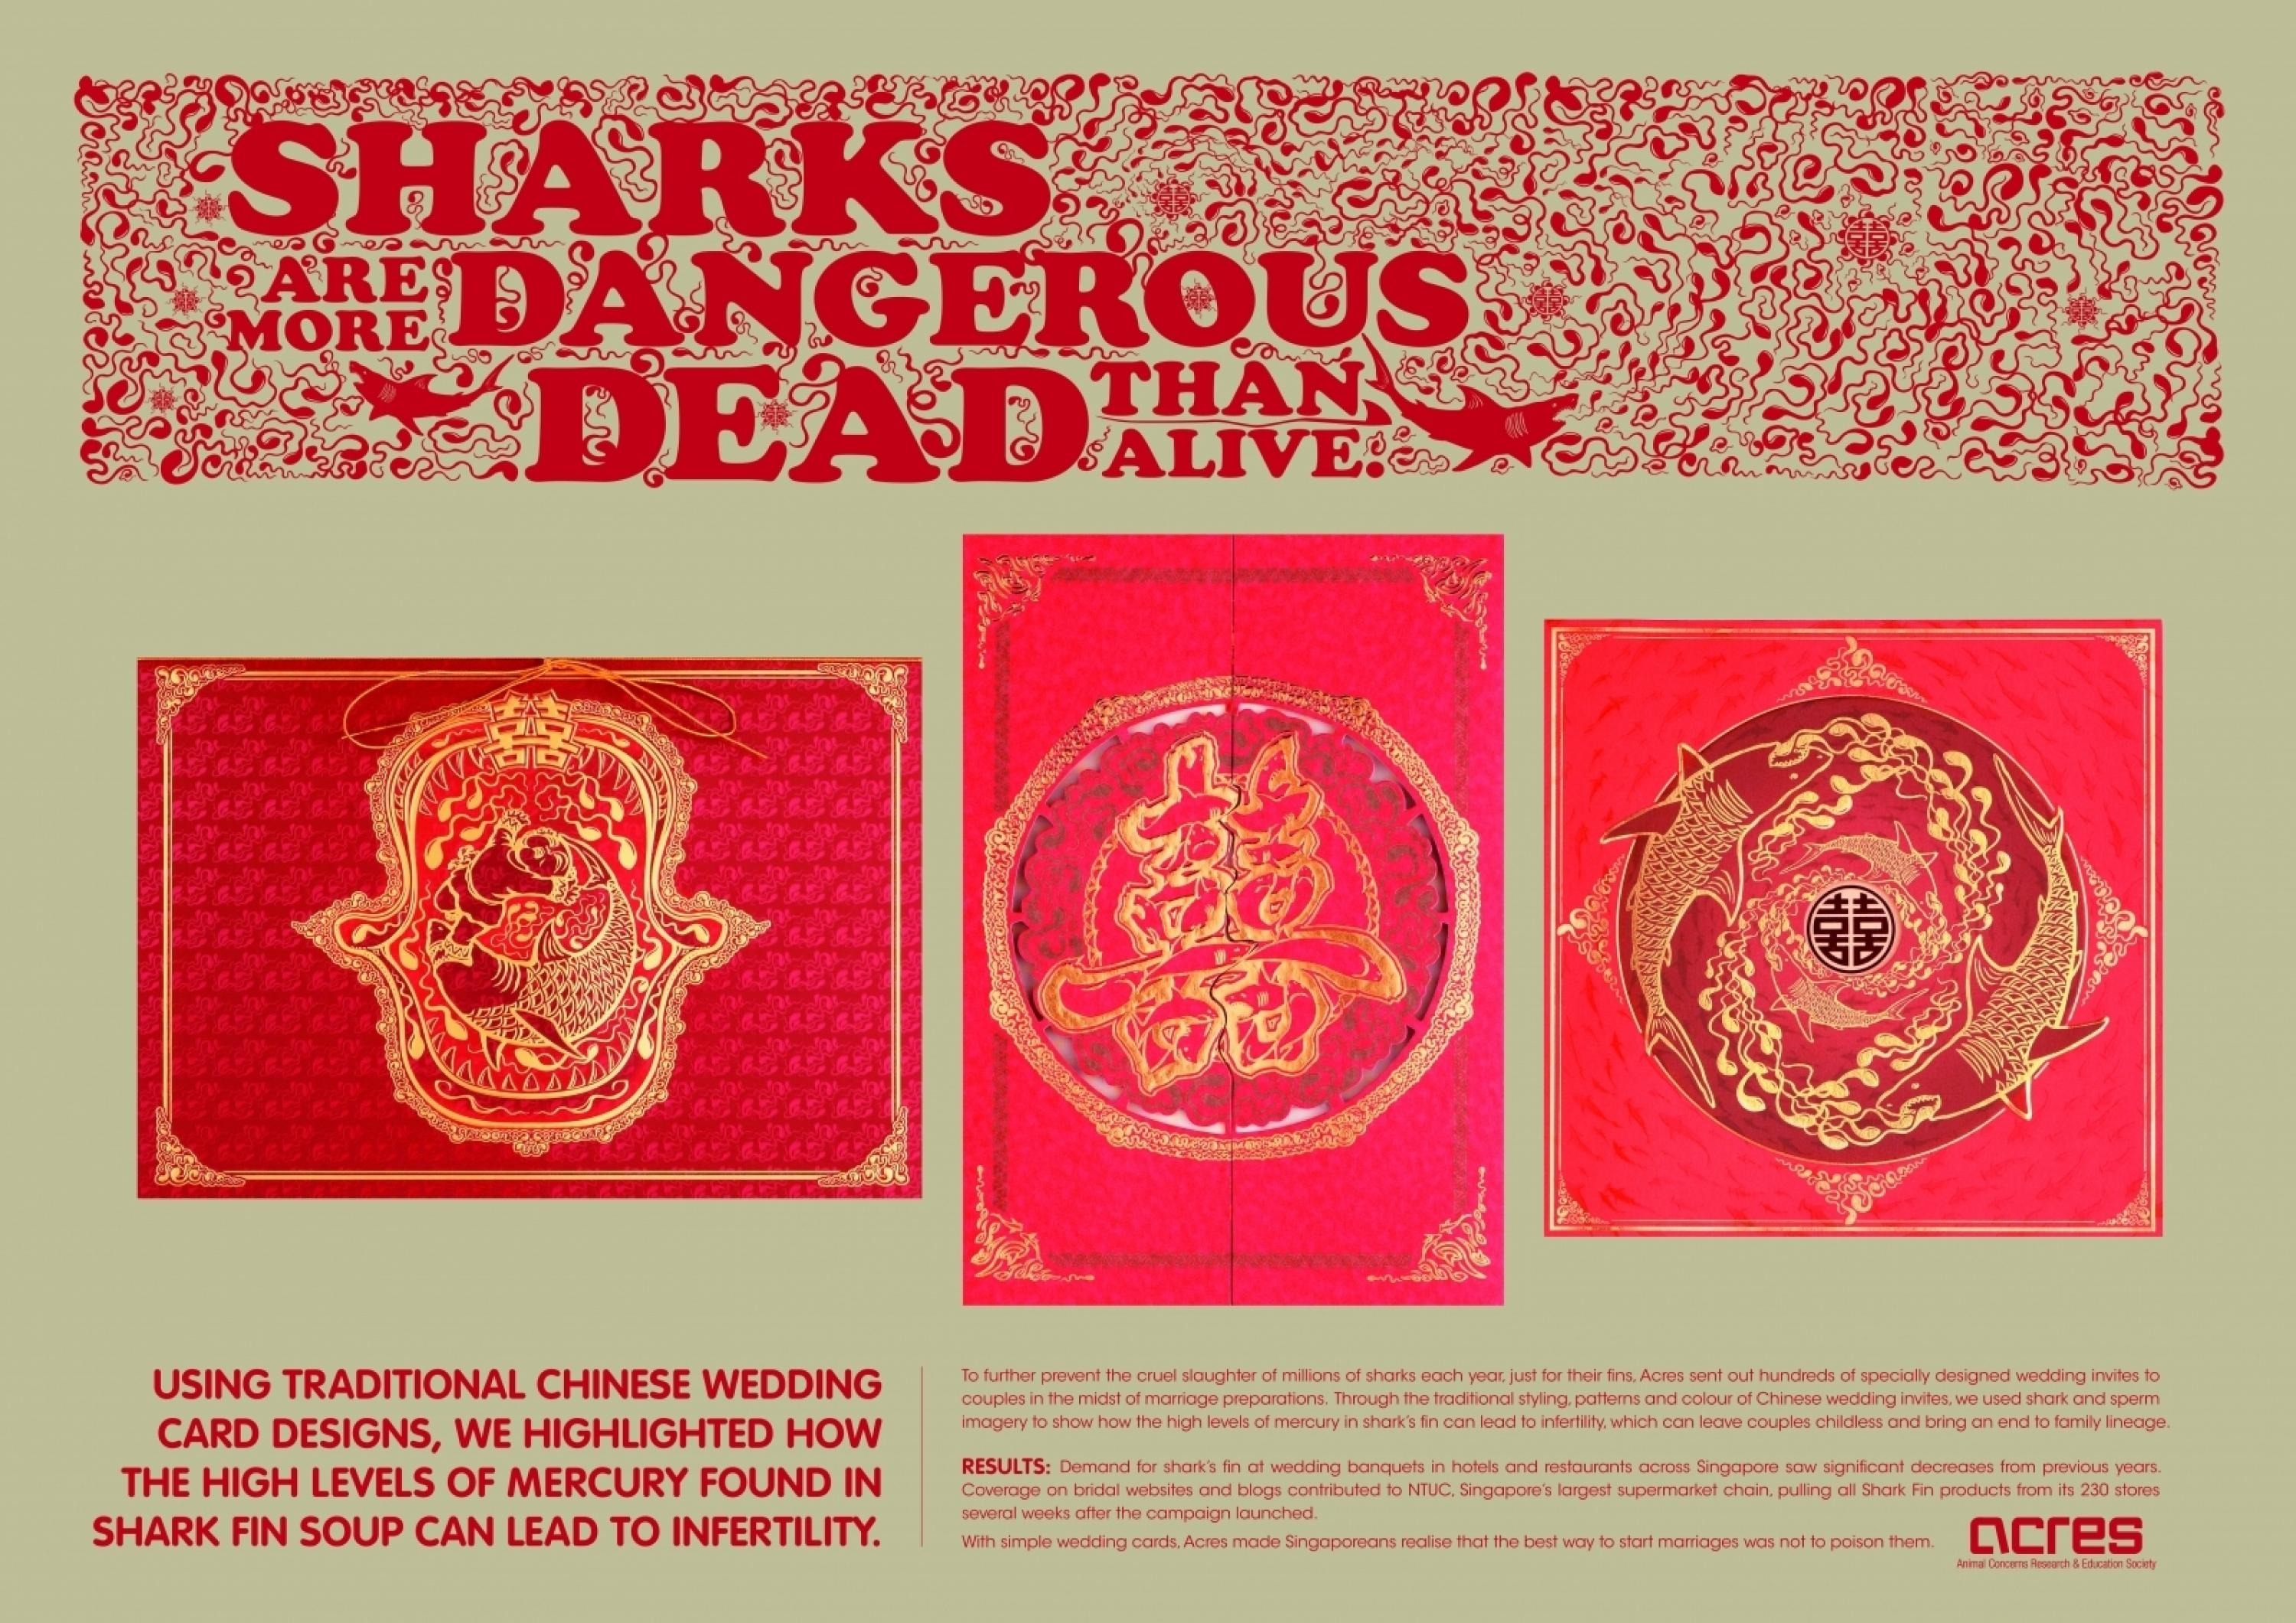 CAMPAIGN AGAINST SHARK'S FIN